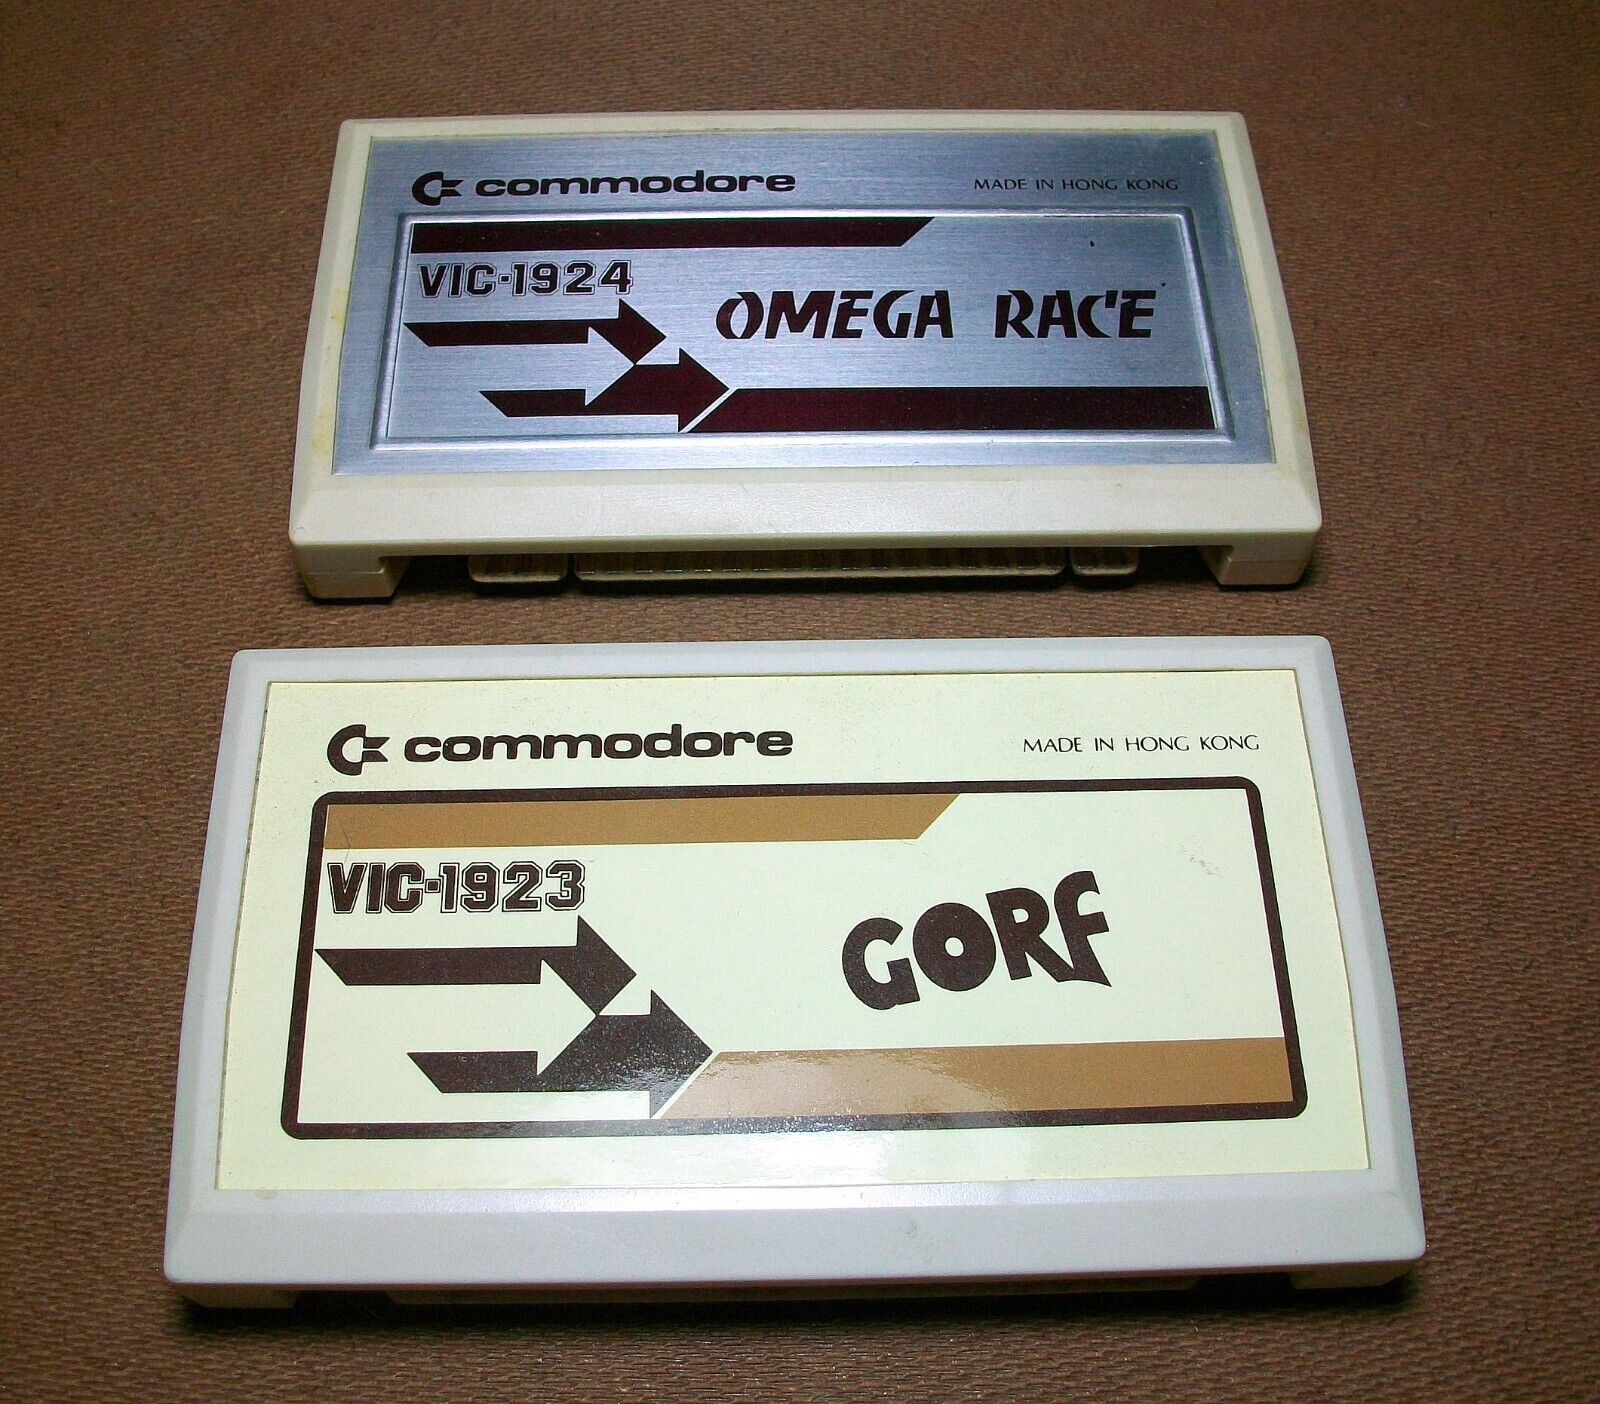 Lot of 2 GAME CARTRIDGES for Vintage Commodore VIC-20 Computer OMEGA RACE & GORF